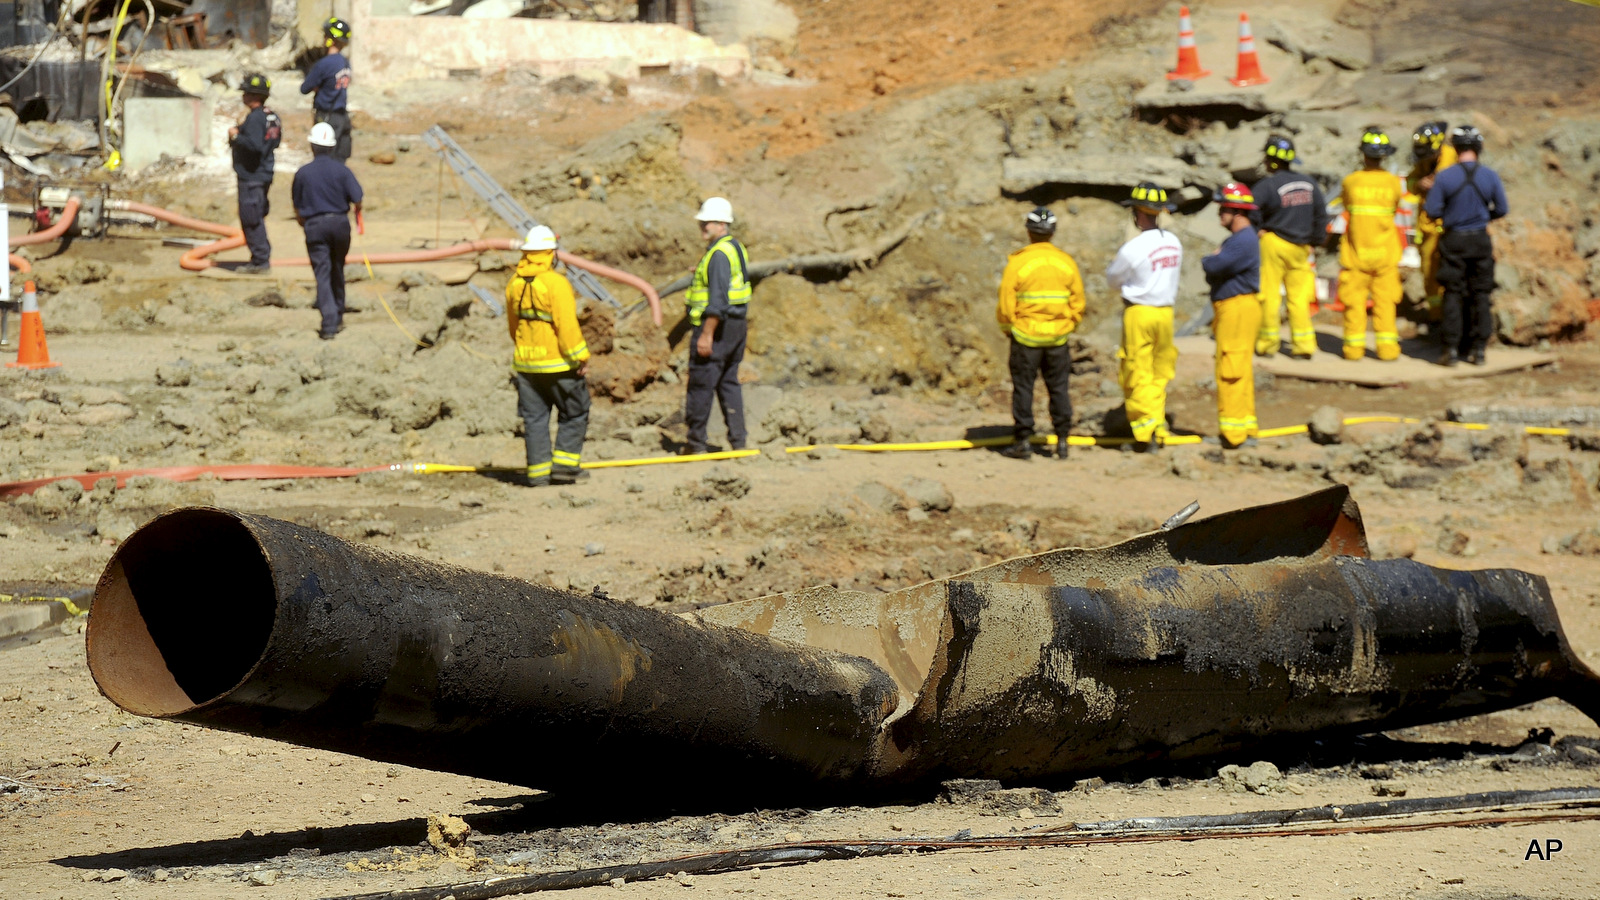 FILE - In this Sept. 11, 2010, file photo, a natural gas line lies broken on a San Bruno, Calif., road after a massive explosion. The blast of a Pacific Gas & Electric Co. natural gas pipeline sent a giant plume of fire into the air in a neighborhood in San Bruno, killing eight people and destroying 38 homes.